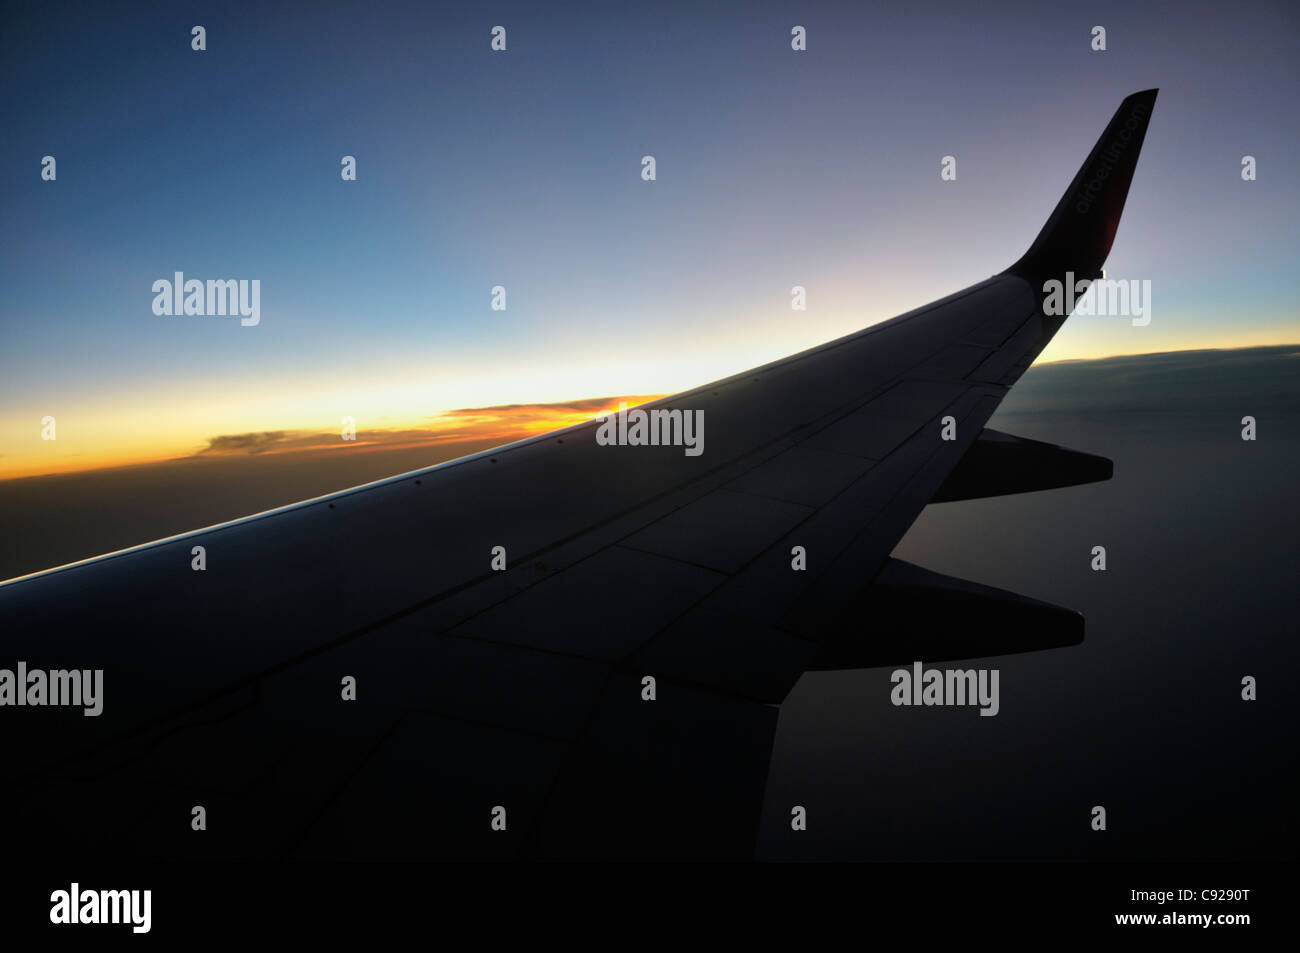 Silhouette of airplane wing with a sunset sky Stock Photo